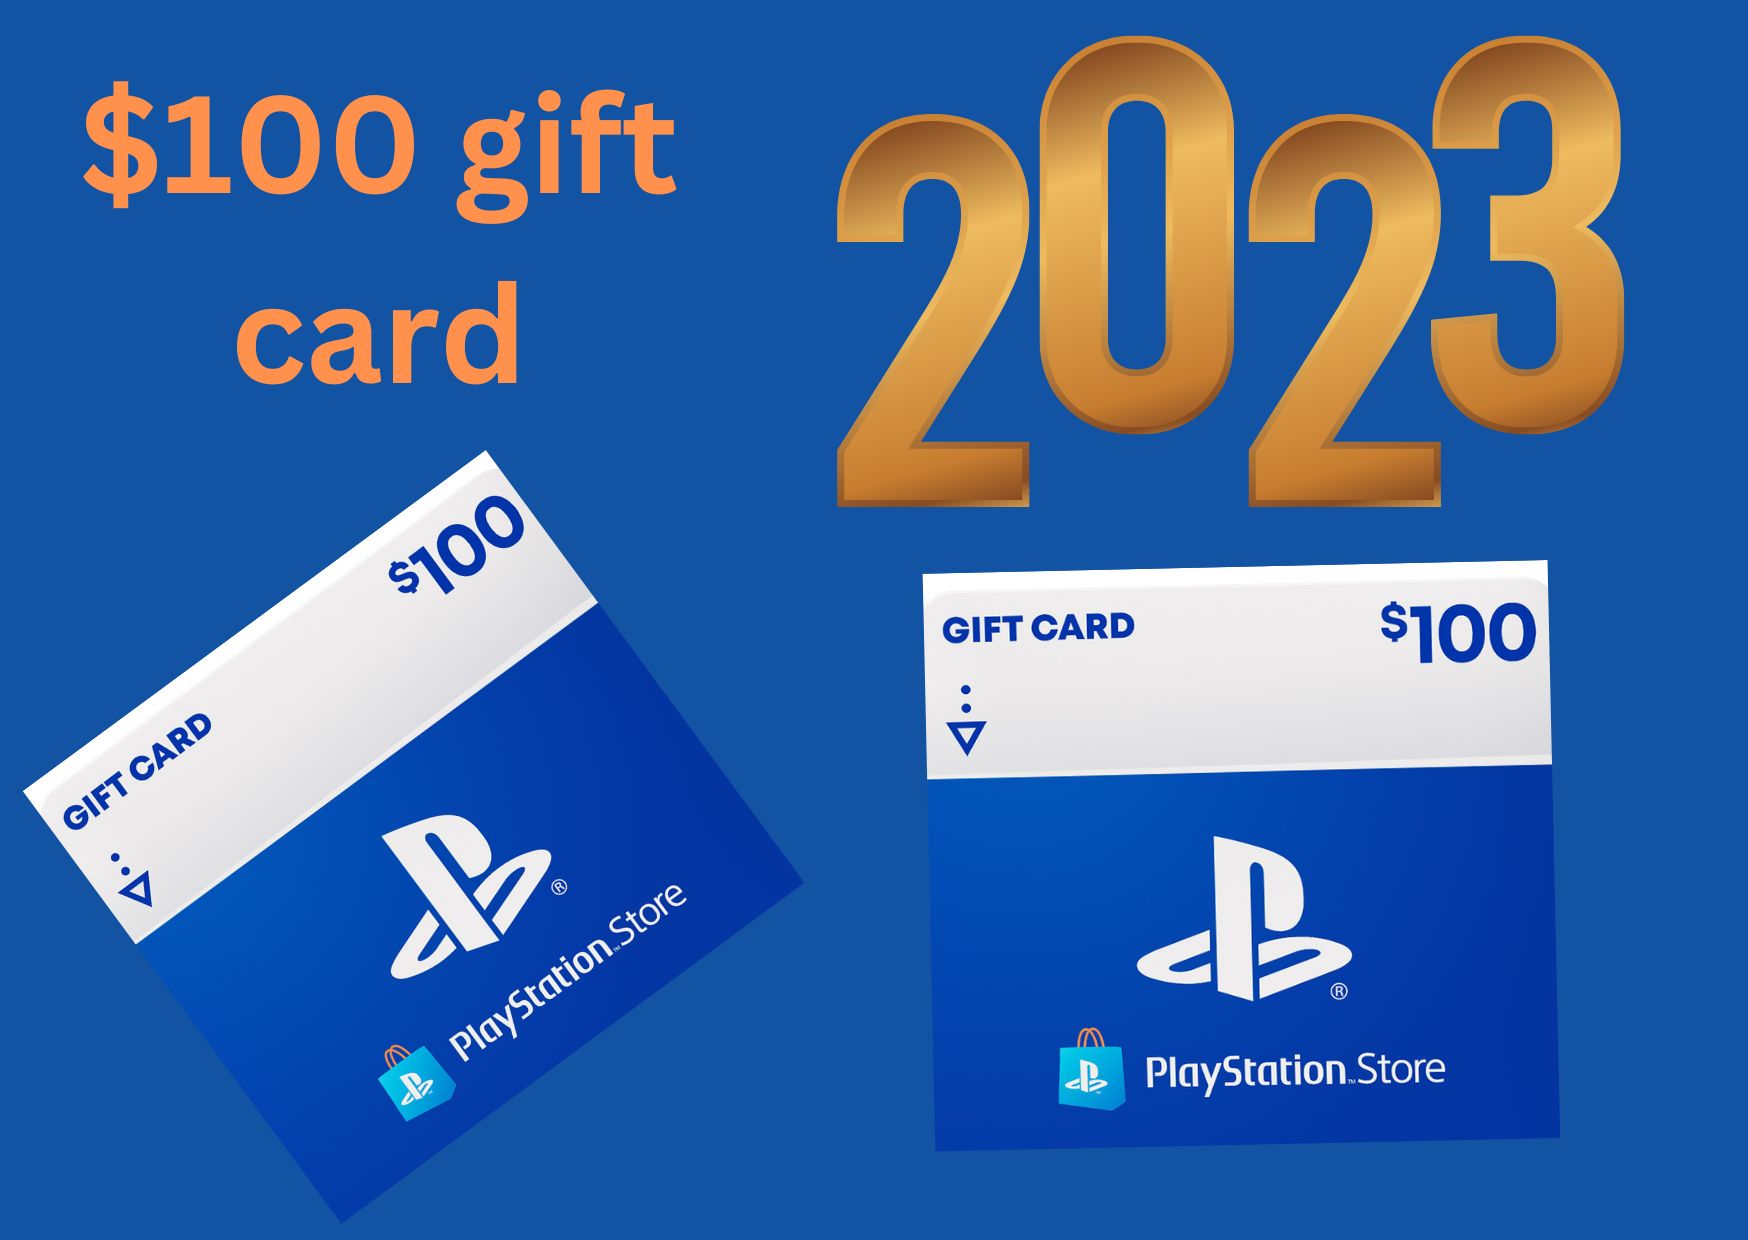 New PlayStation store gift card 2023